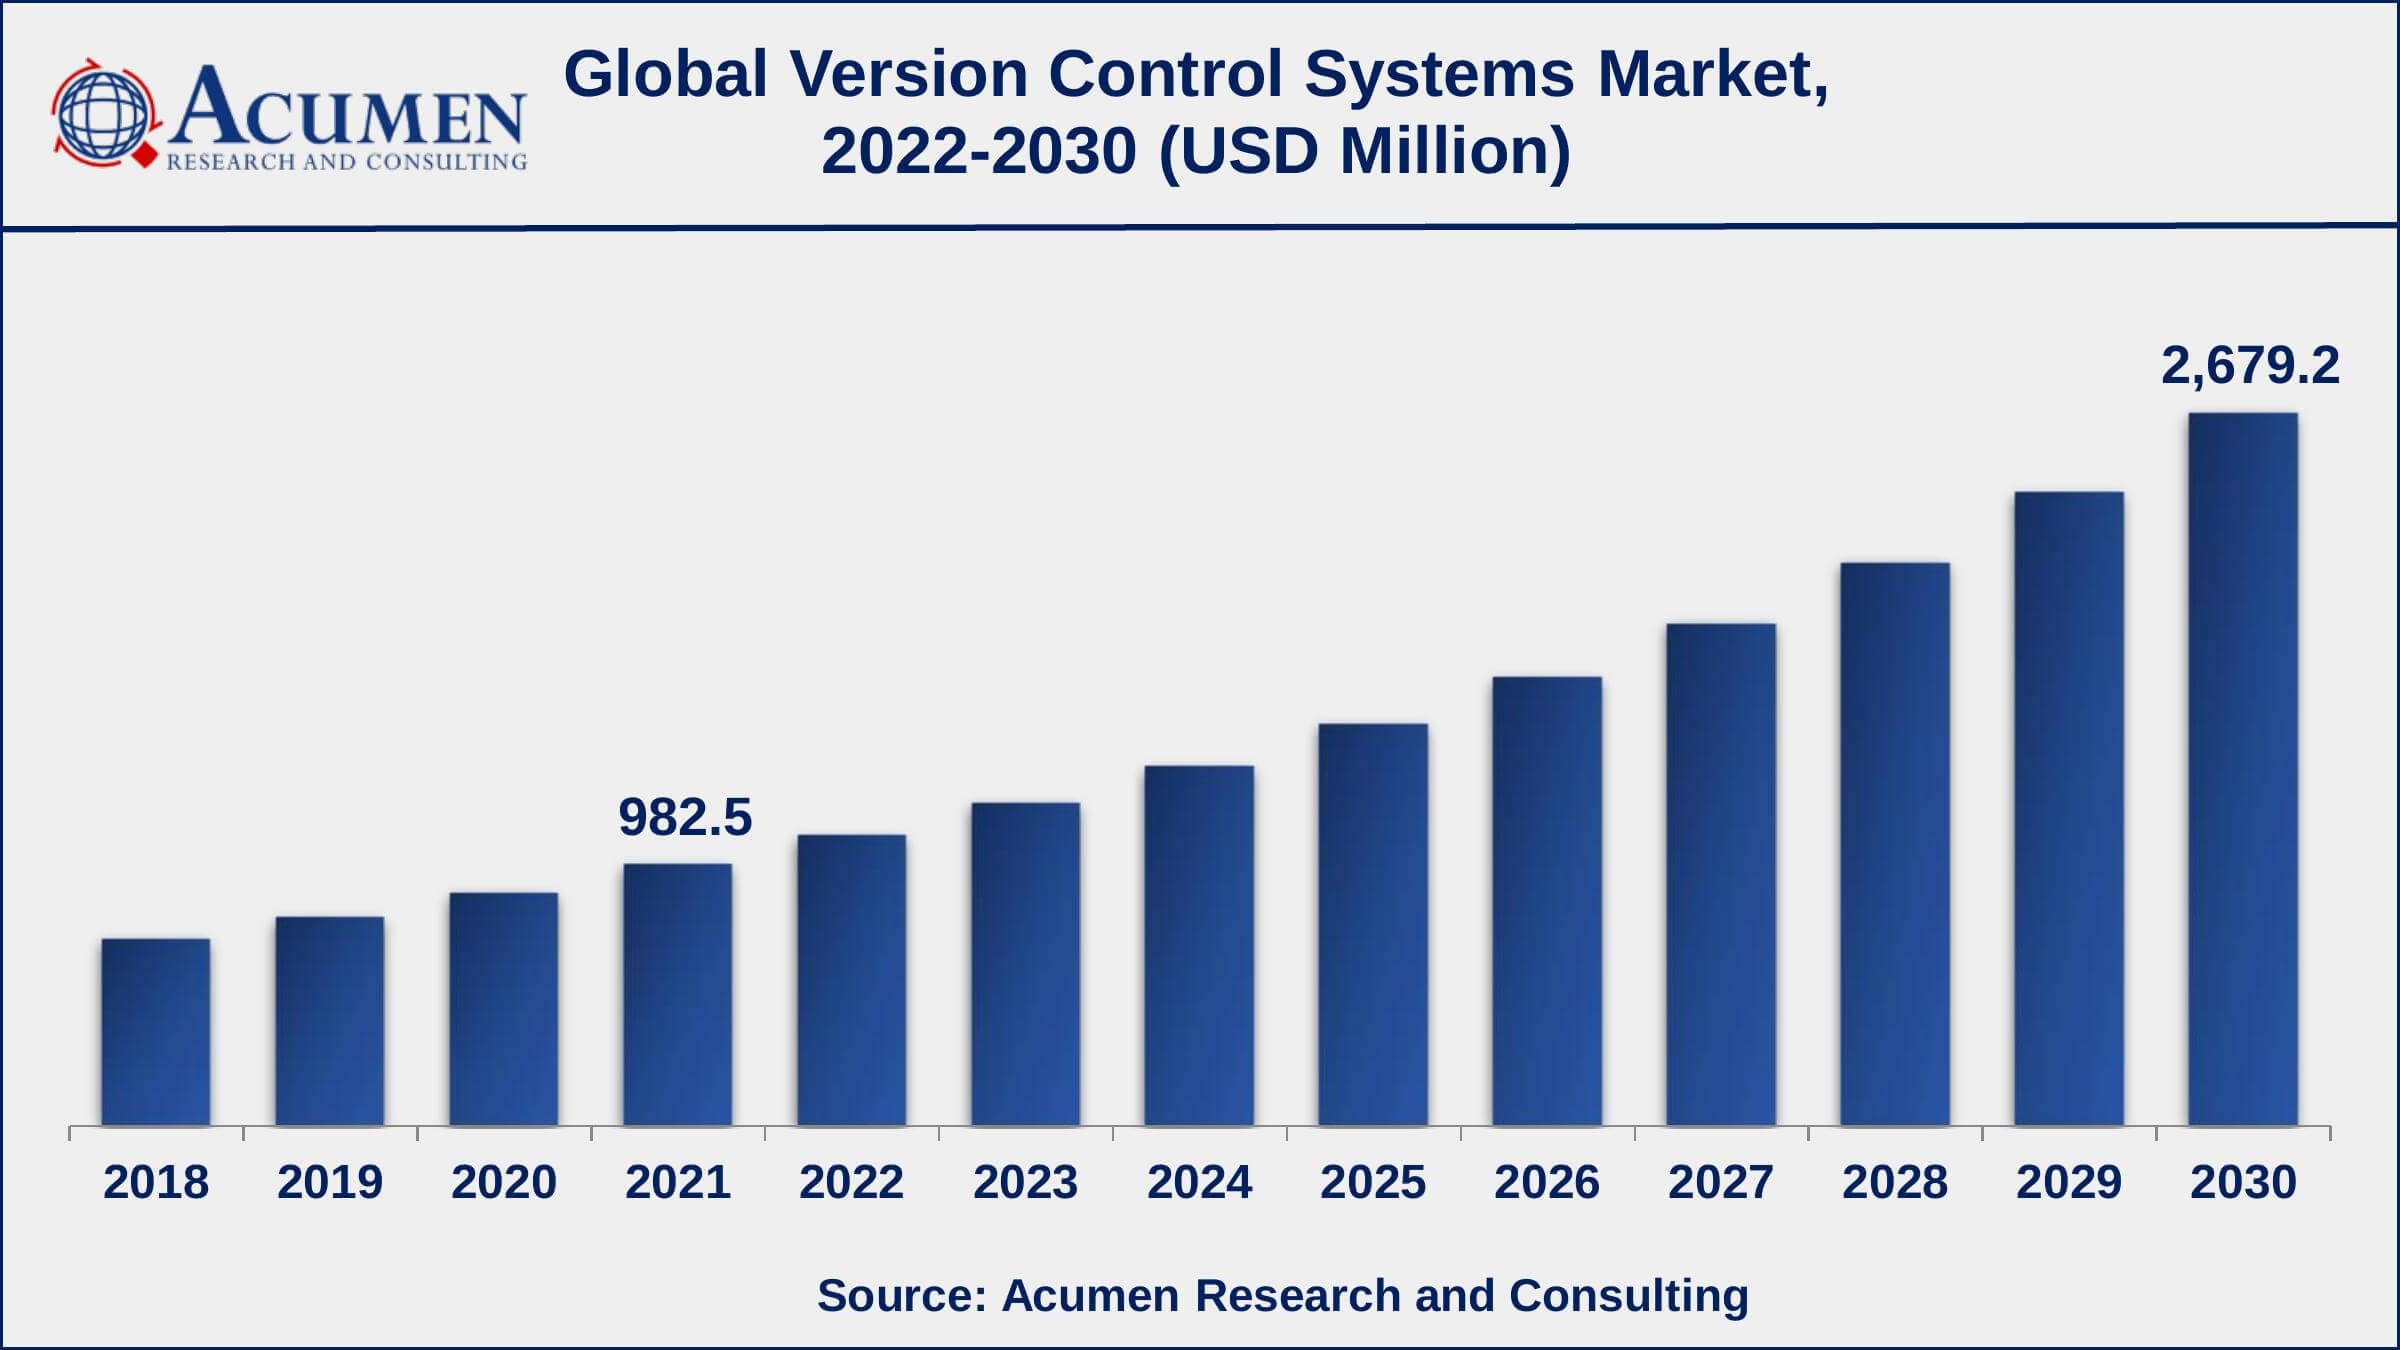 Asia-Pacific version control systems market growth will record a significant CAGR from 2022 to 2030